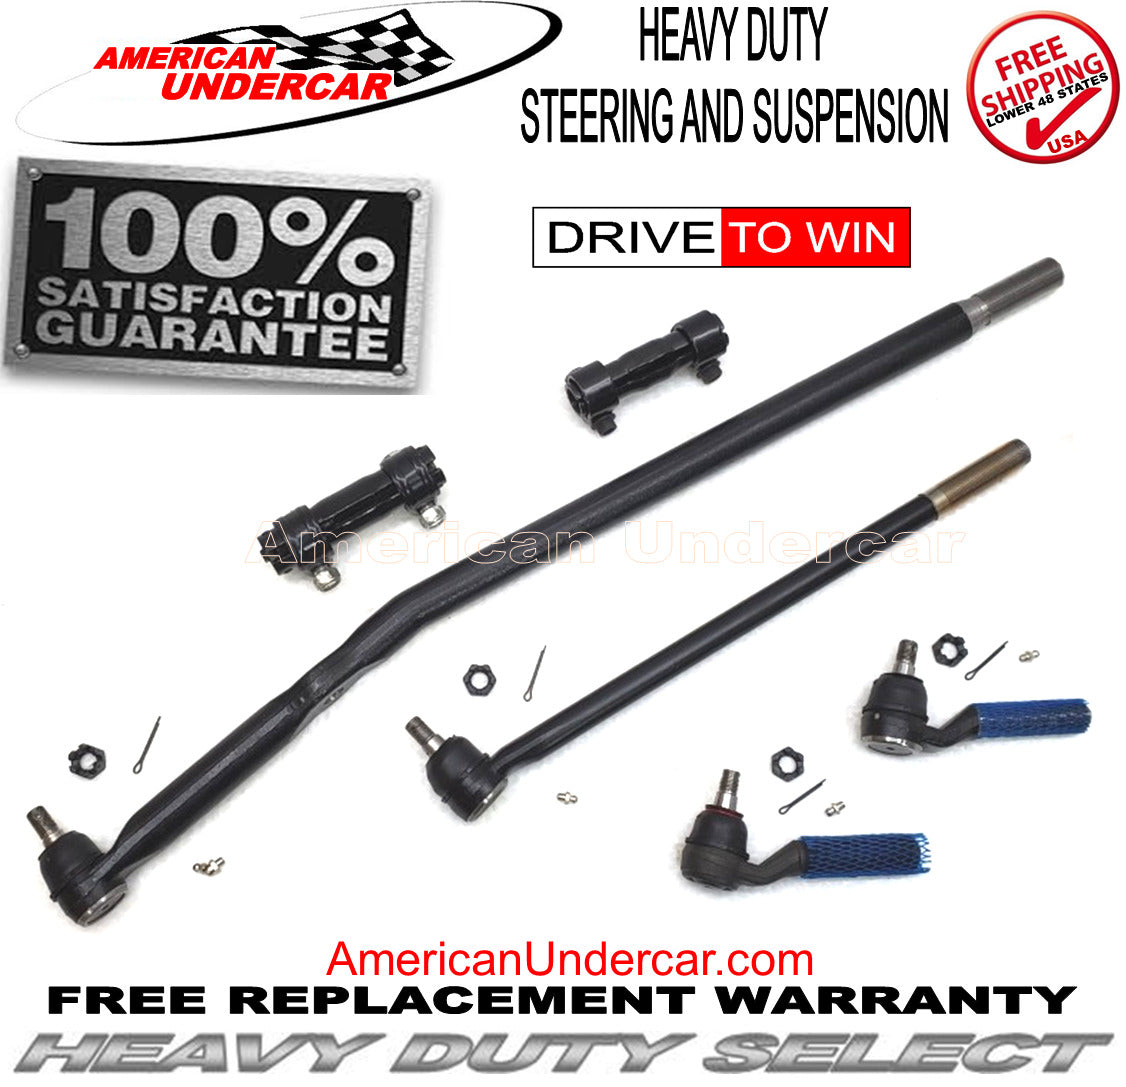 HD Tie Rod Drag Link Steering Kit for 1995-1997 Ford F250, F250HD 4x4